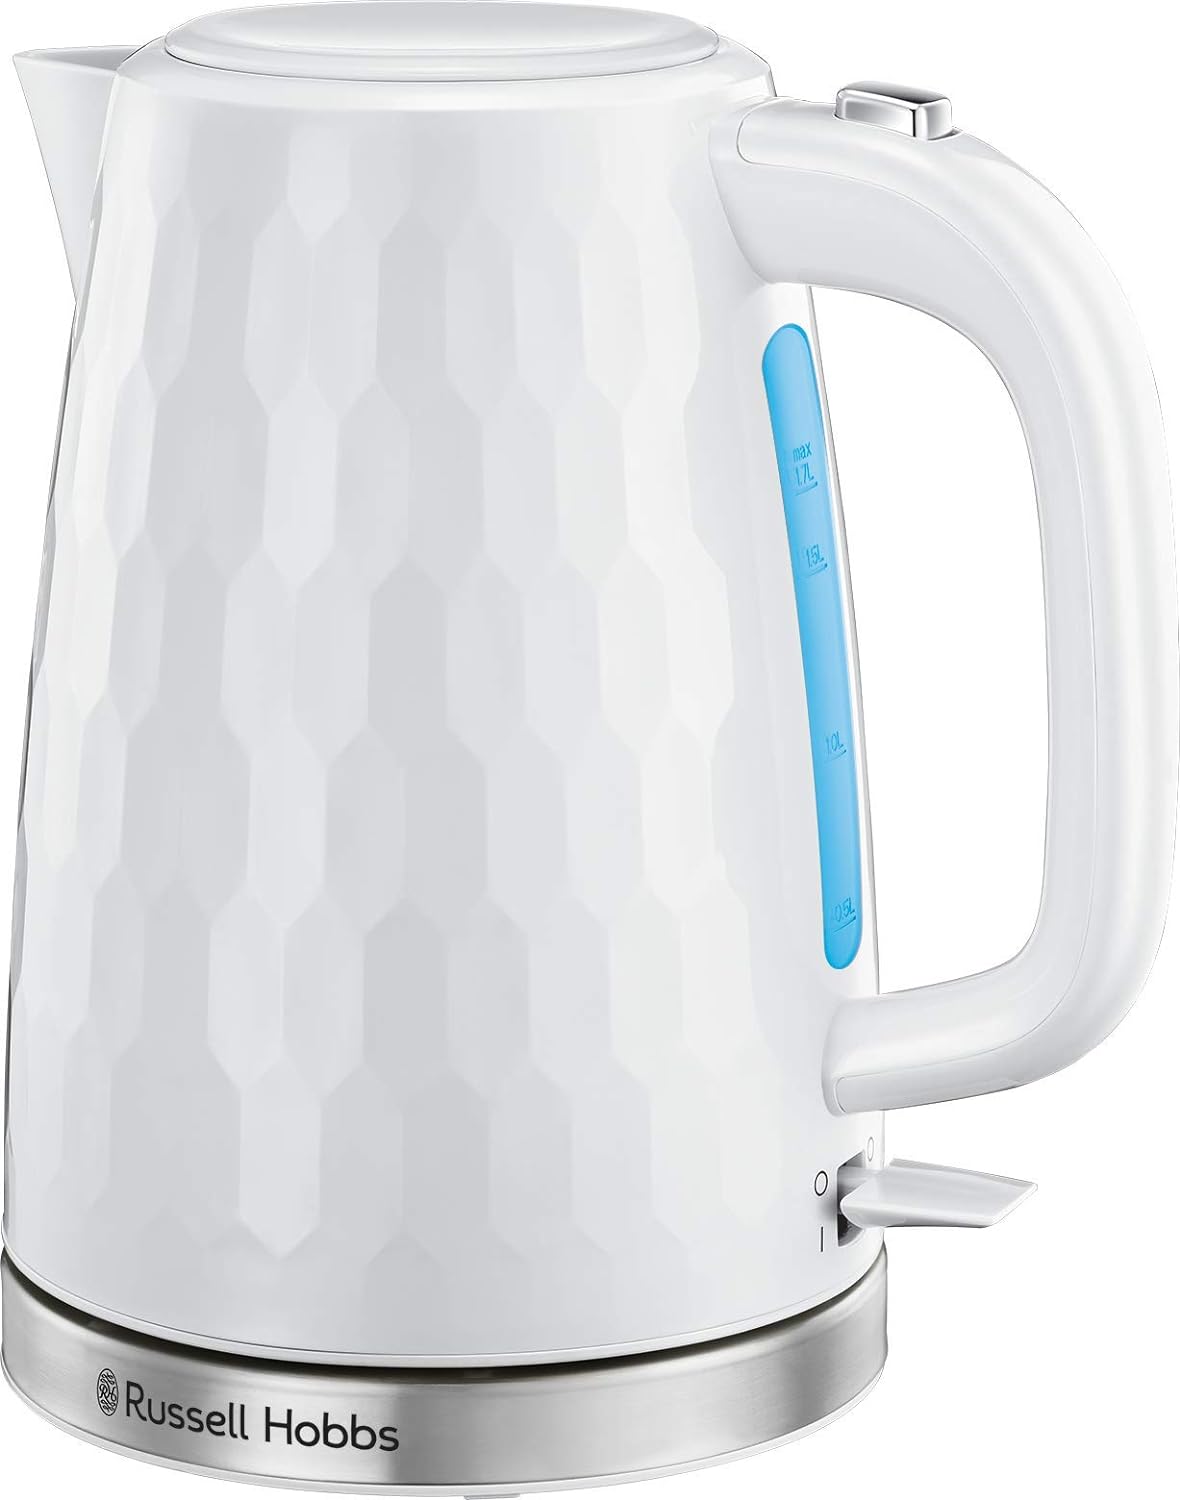 Russell Hobbs Textures Cordless Electric Kettle - Fast Boil, 1.7 Litre, 3000 W, White